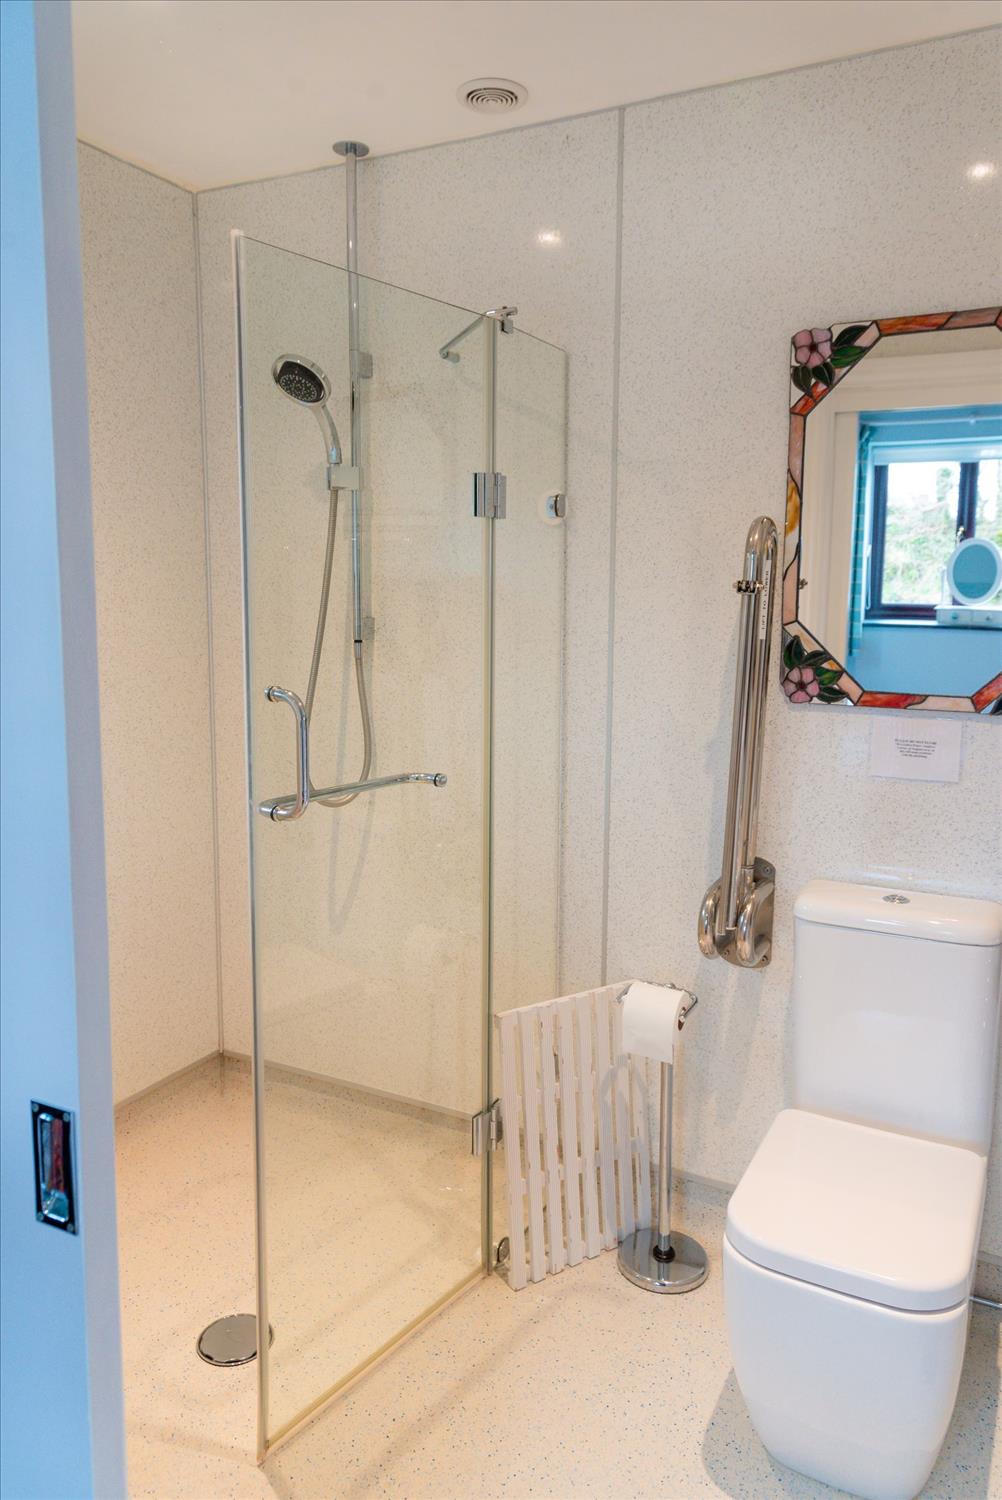 Sloe Cottage's 'Wet room'-style bathroom, with remote control shower and accessible toilet